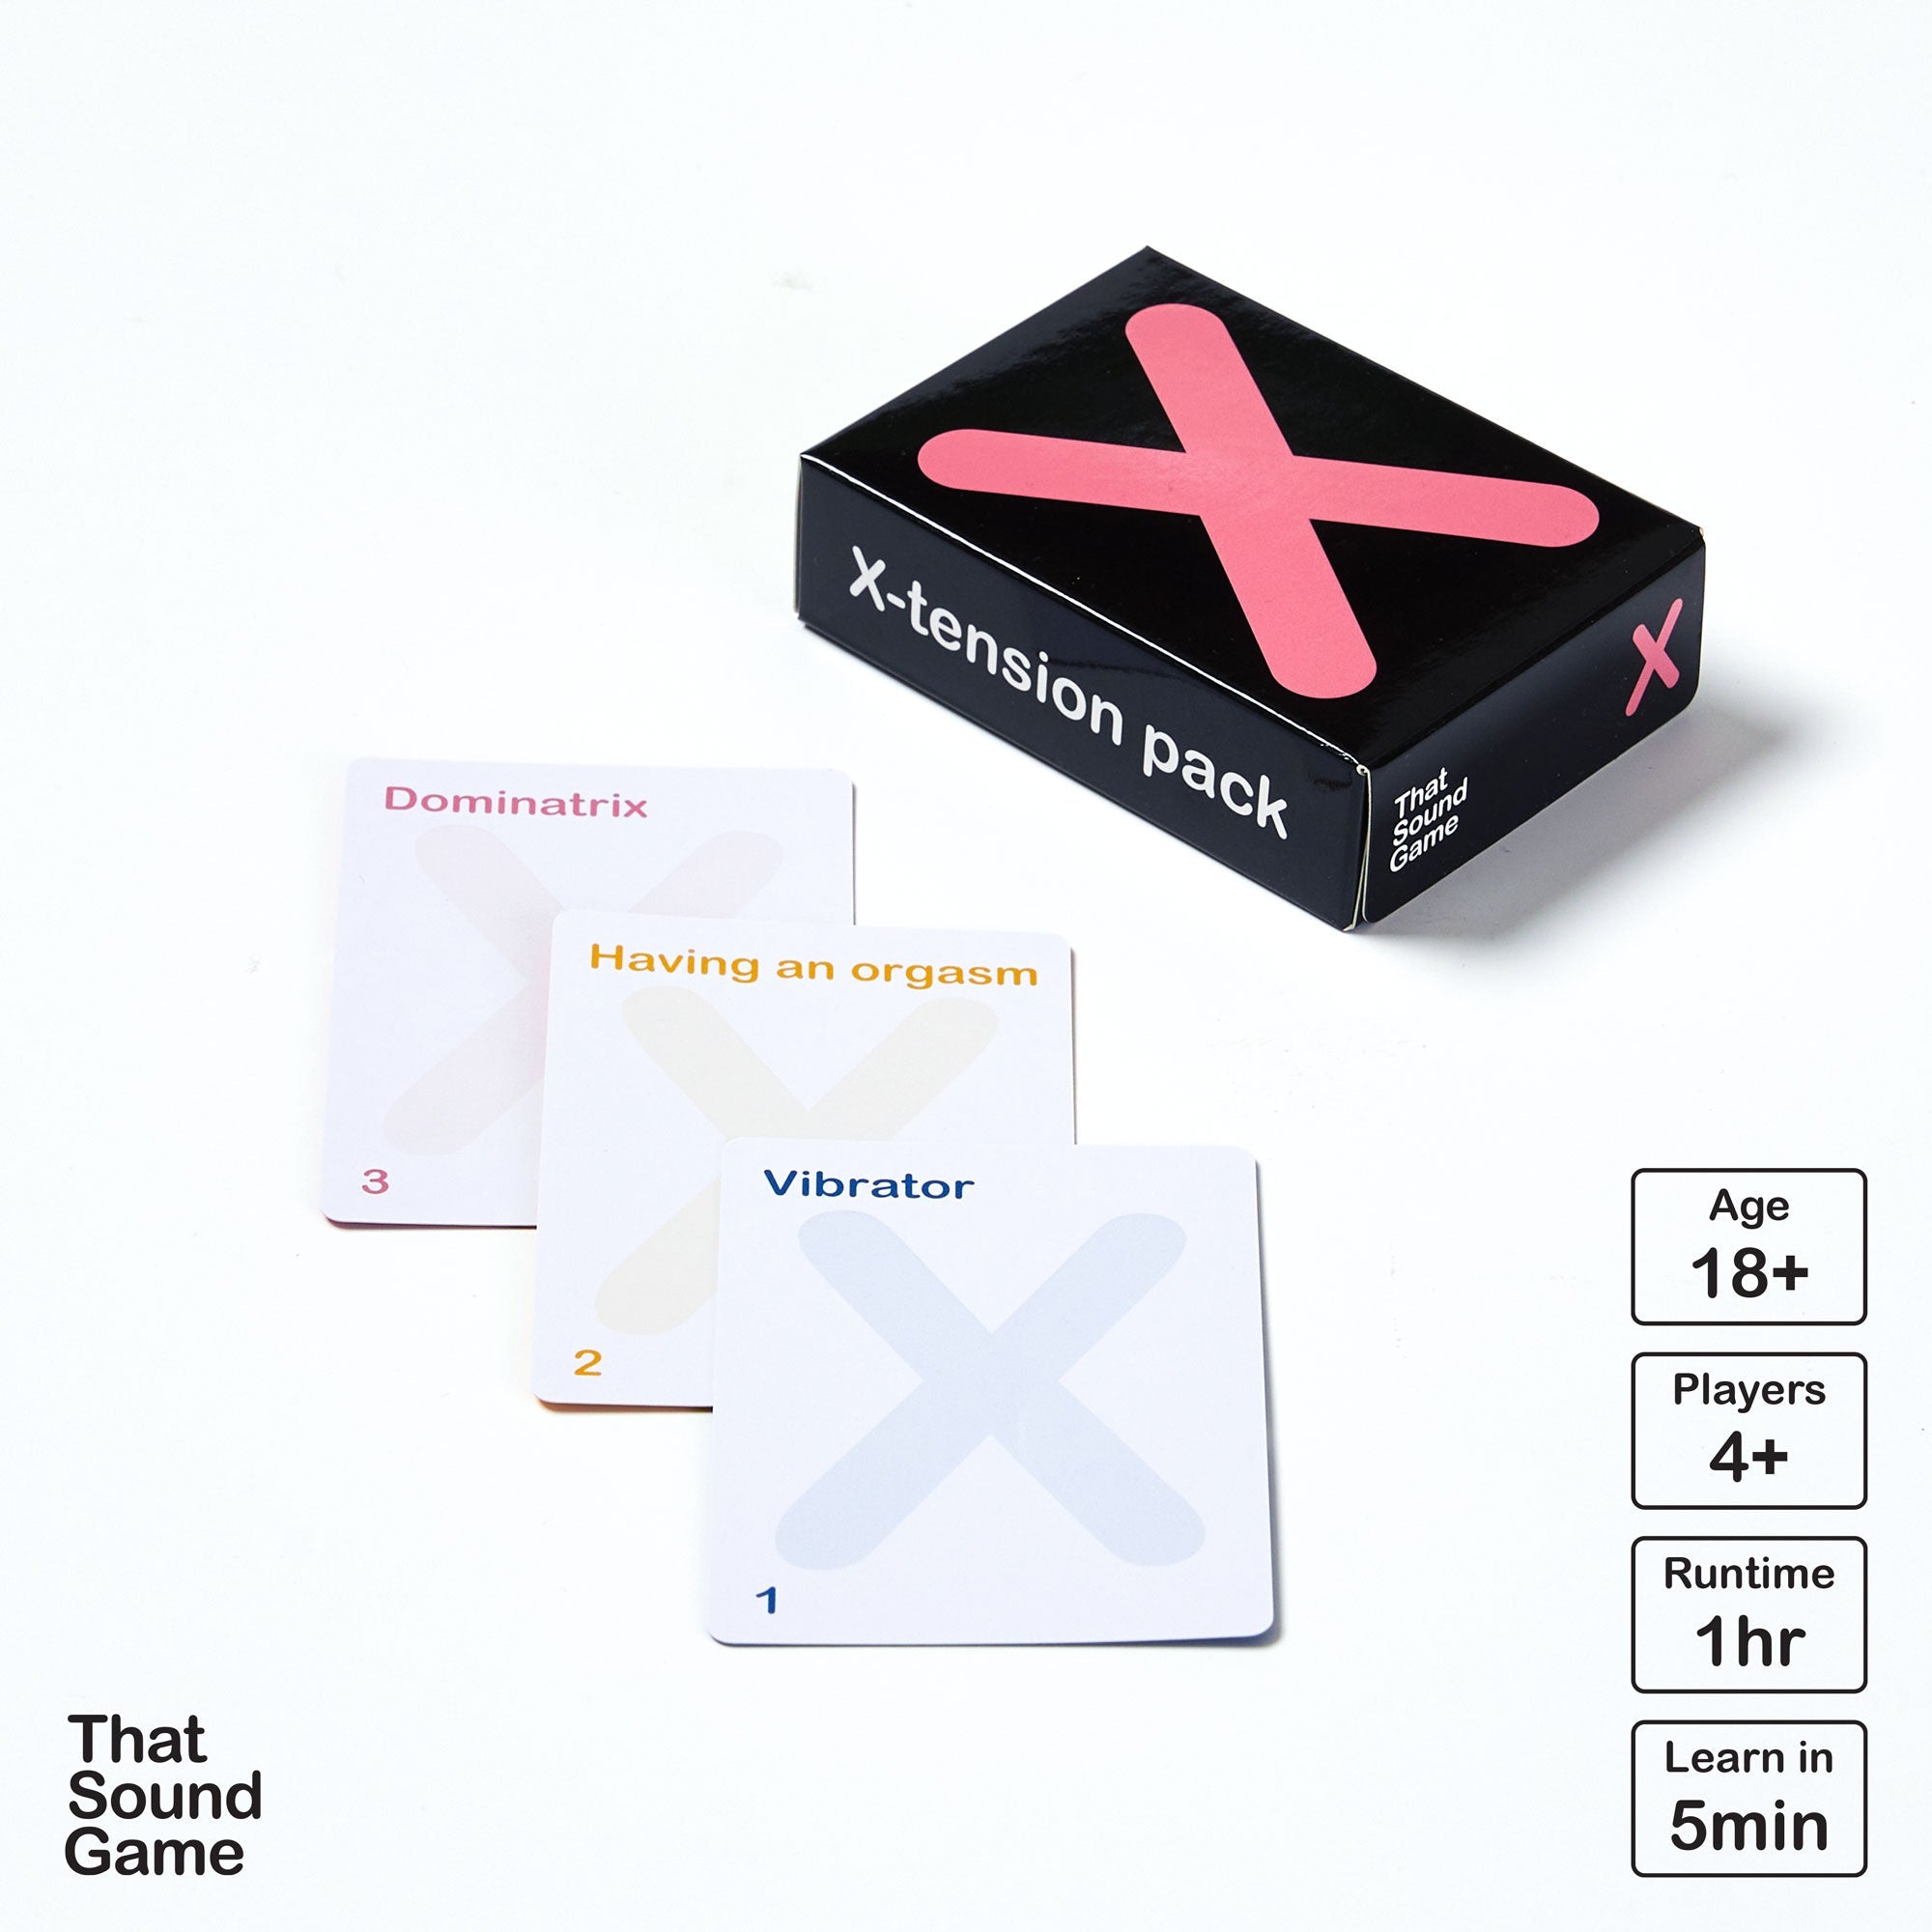 That Sound Game X-tension Pack - Gaming Library